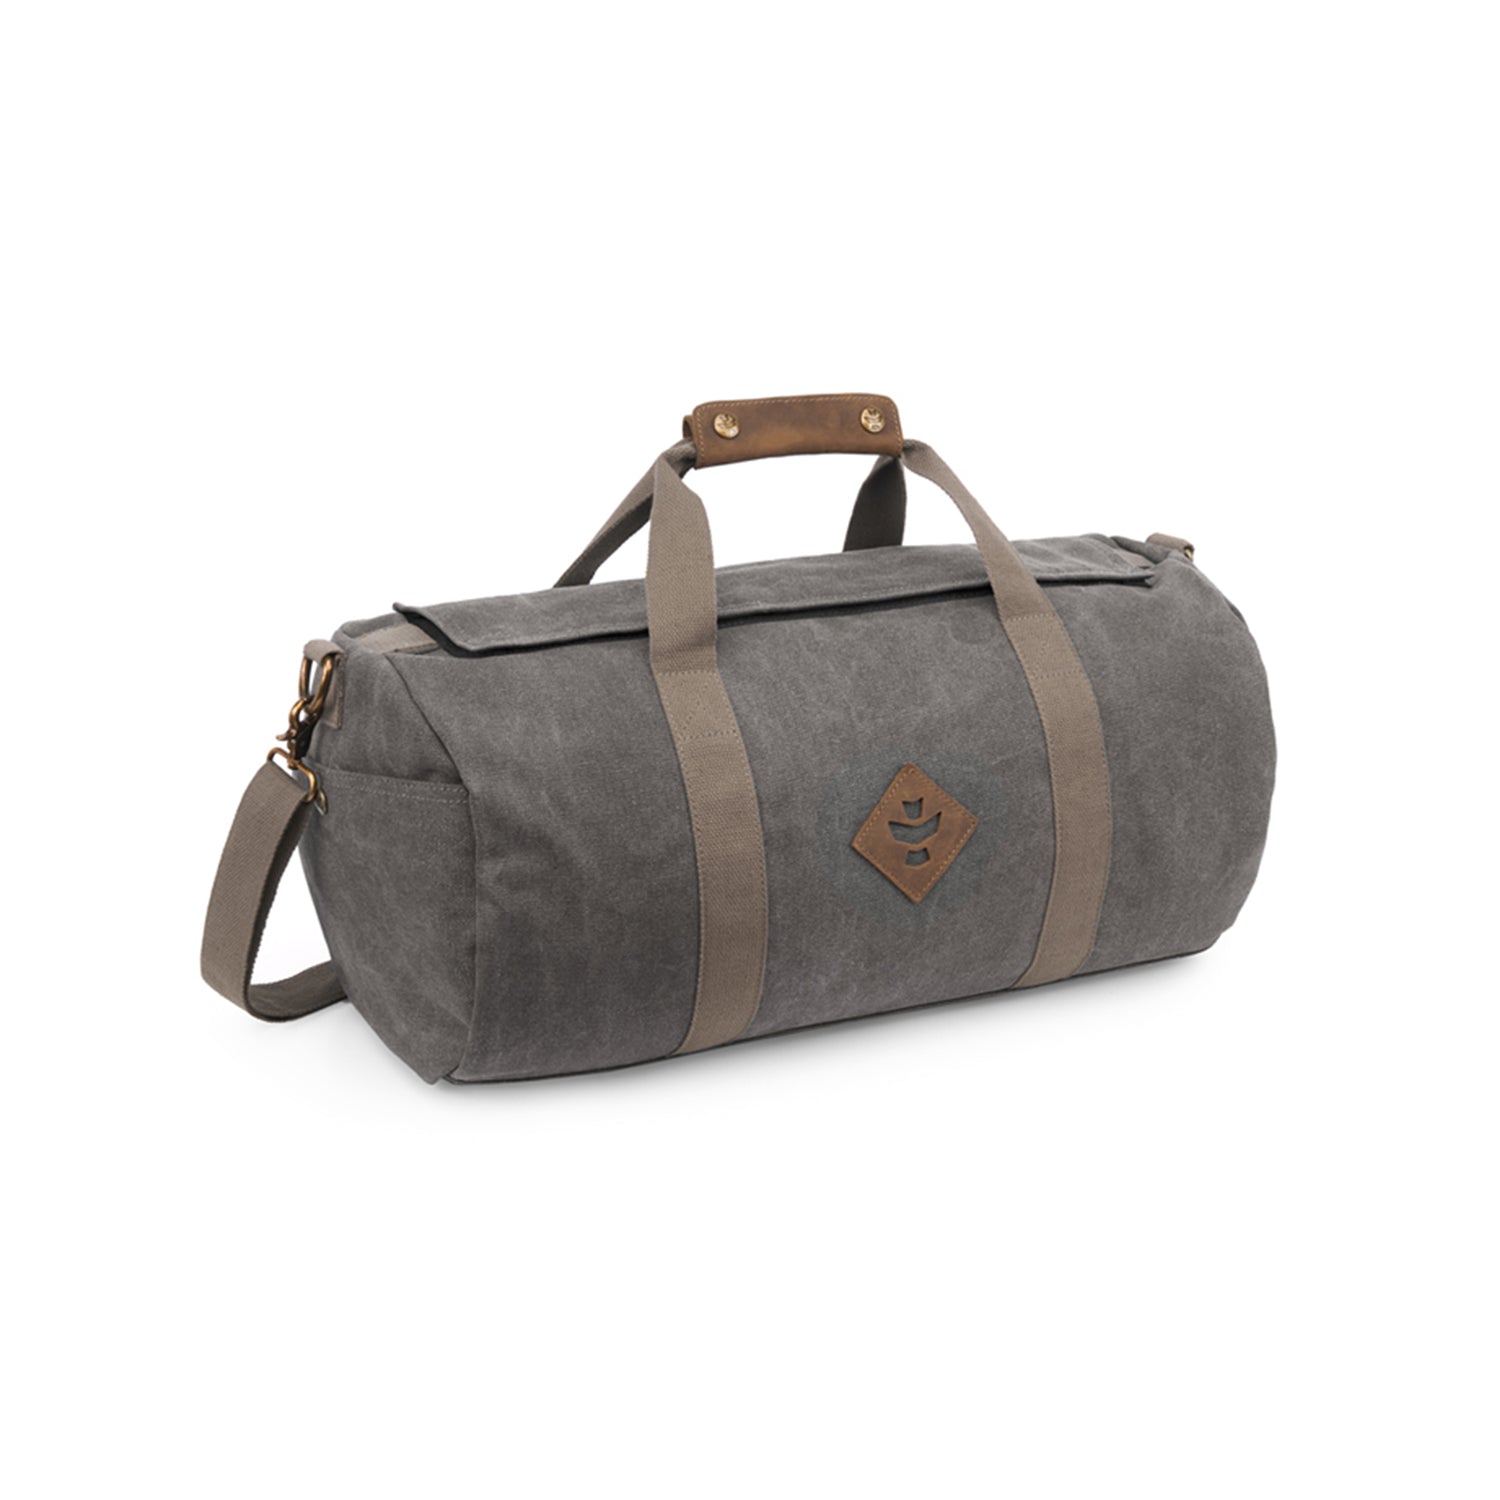 Ash Canvas Smell Proof Water Resistant Small Duffle Bag